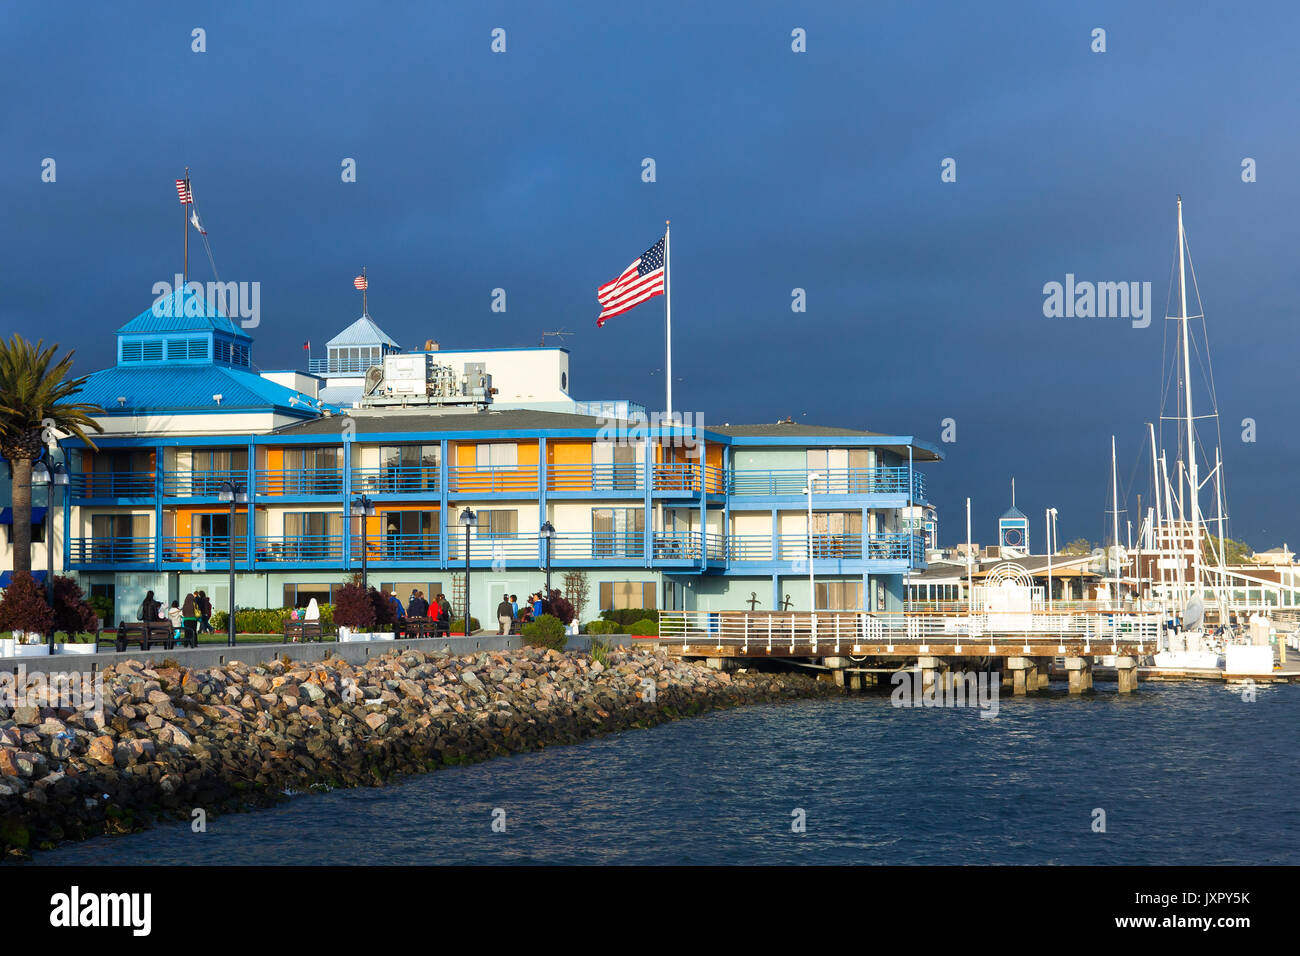 Oakland, California waterfront marina buildings and boats at sunset. Jack London Square area Stock Photo